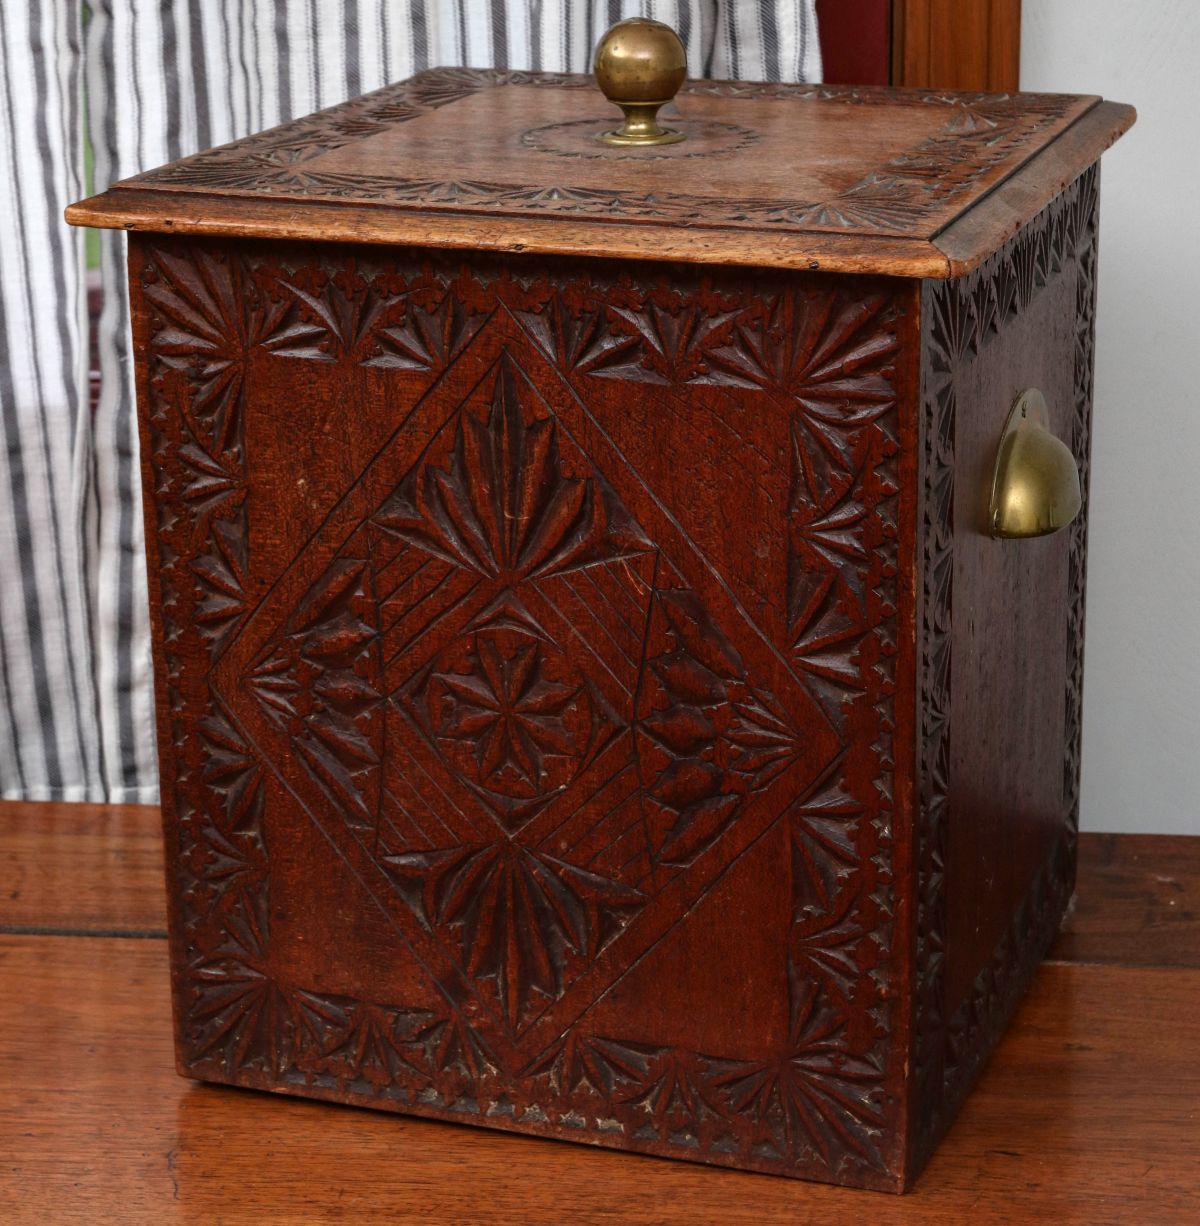 AN ANTIQUE CARVED MAHOGANY KINDLING BOX WITH BRASS